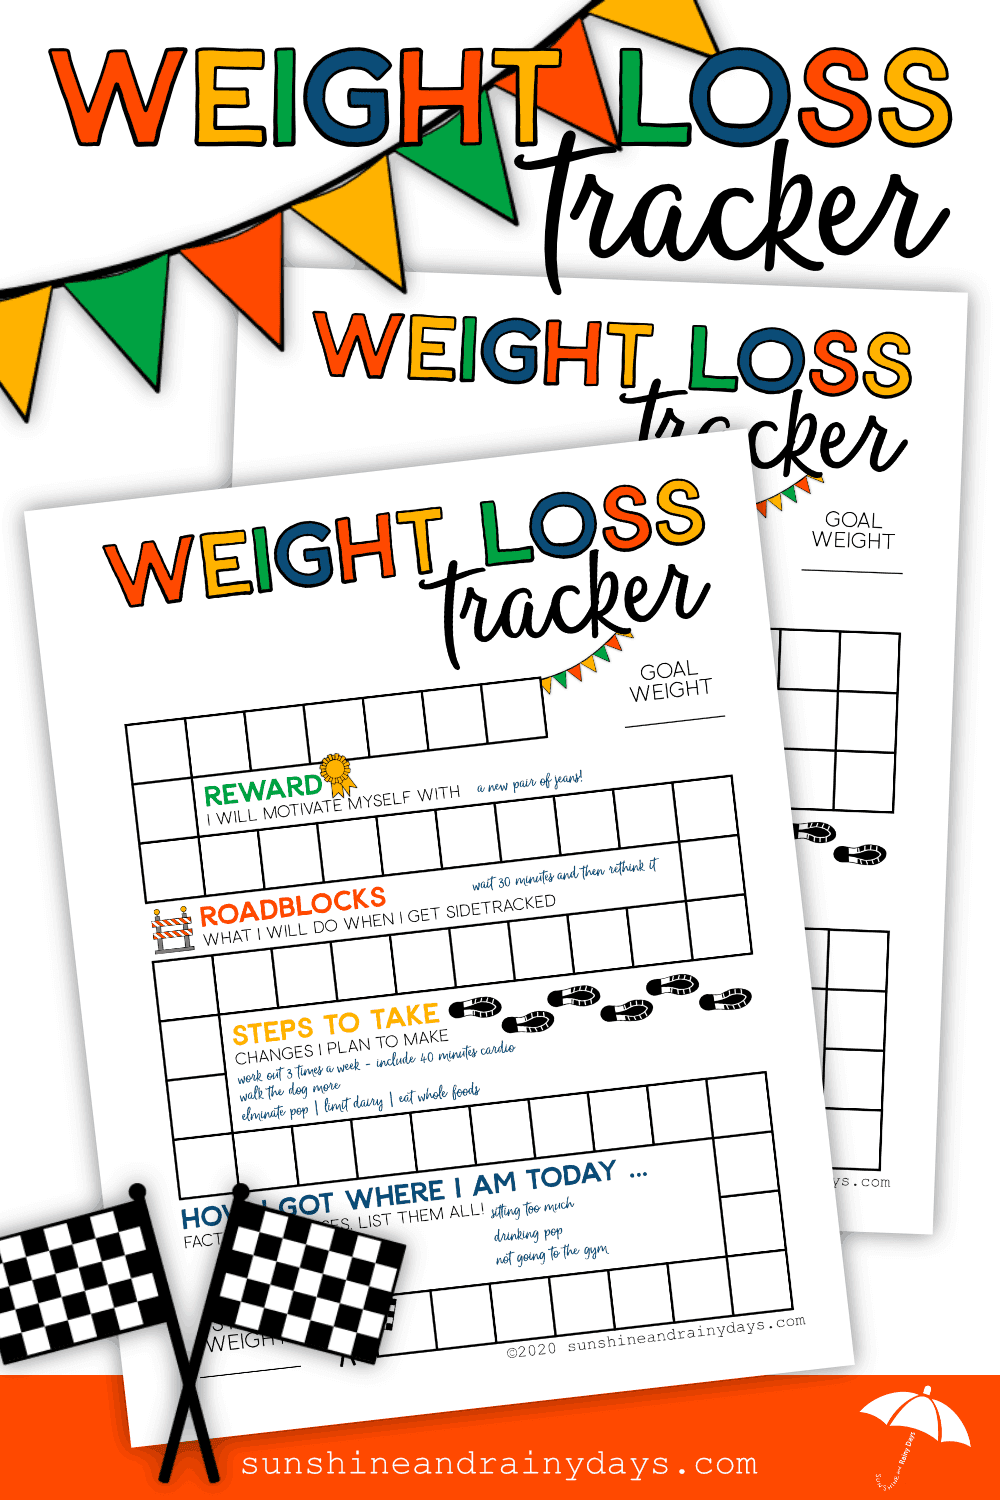 https://sunshineandrainydays.com/wp-content/uploads/2020/02/Weight-Loss-Tracker-P.png.webp